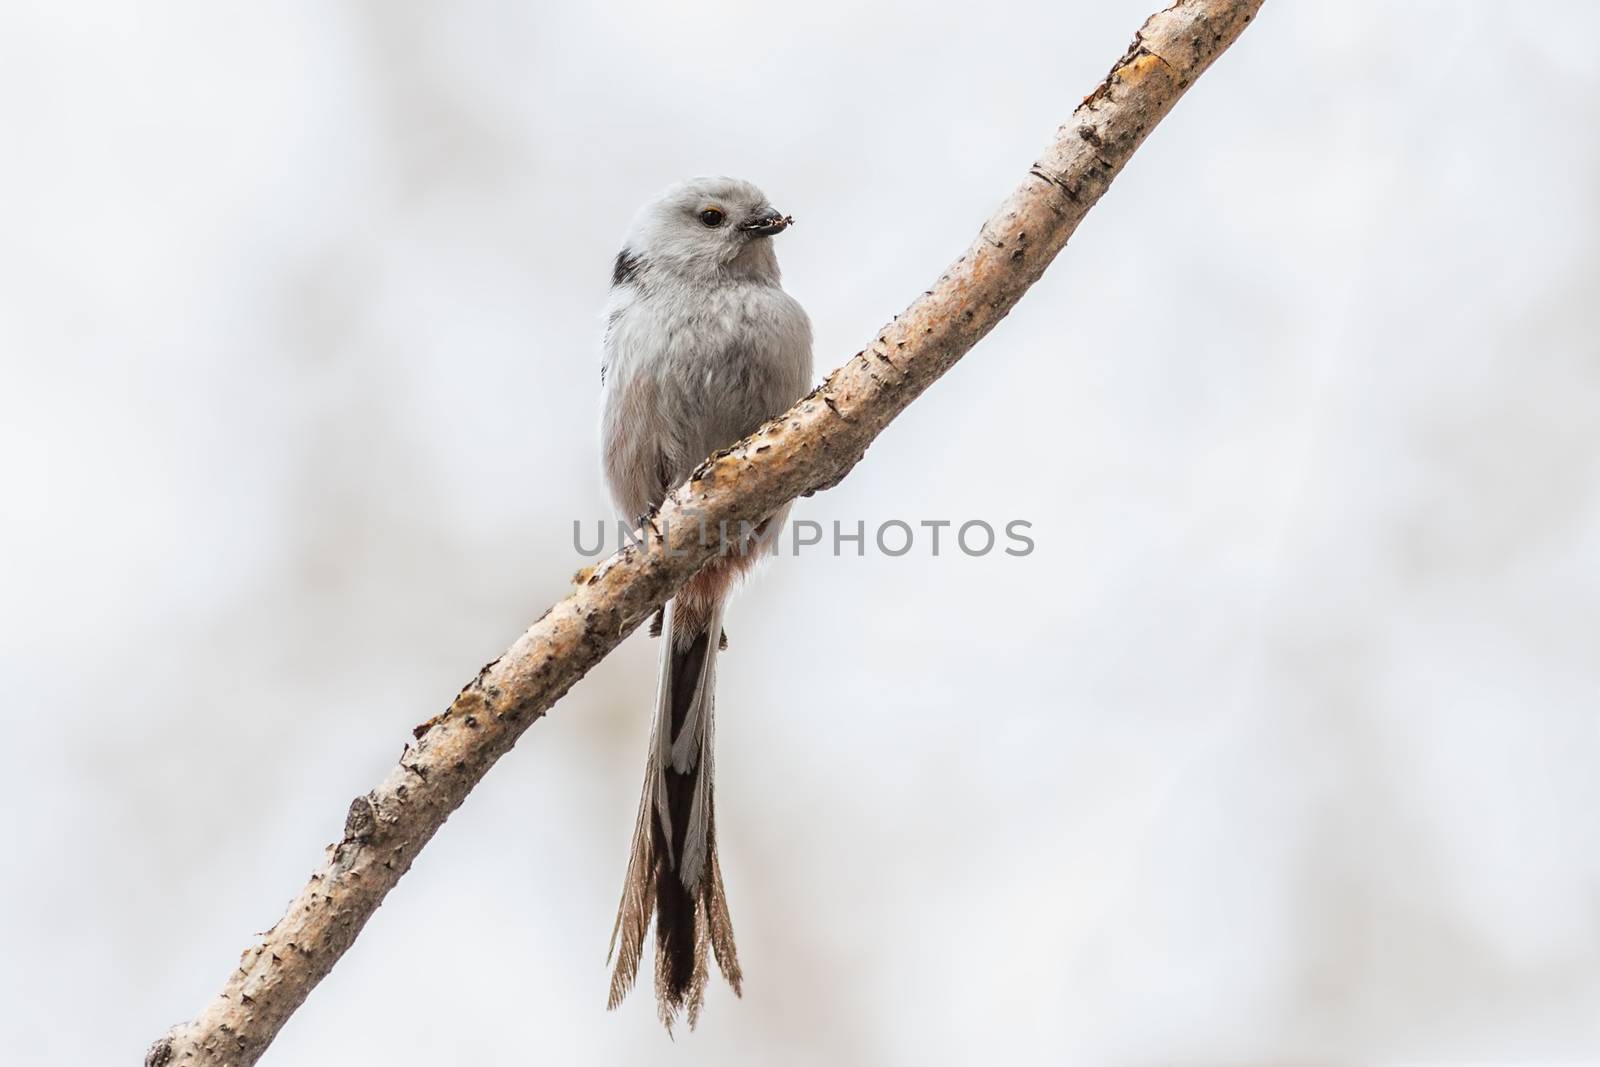 Long-tailed Tit sits on a branch with material for building a nest in the beak